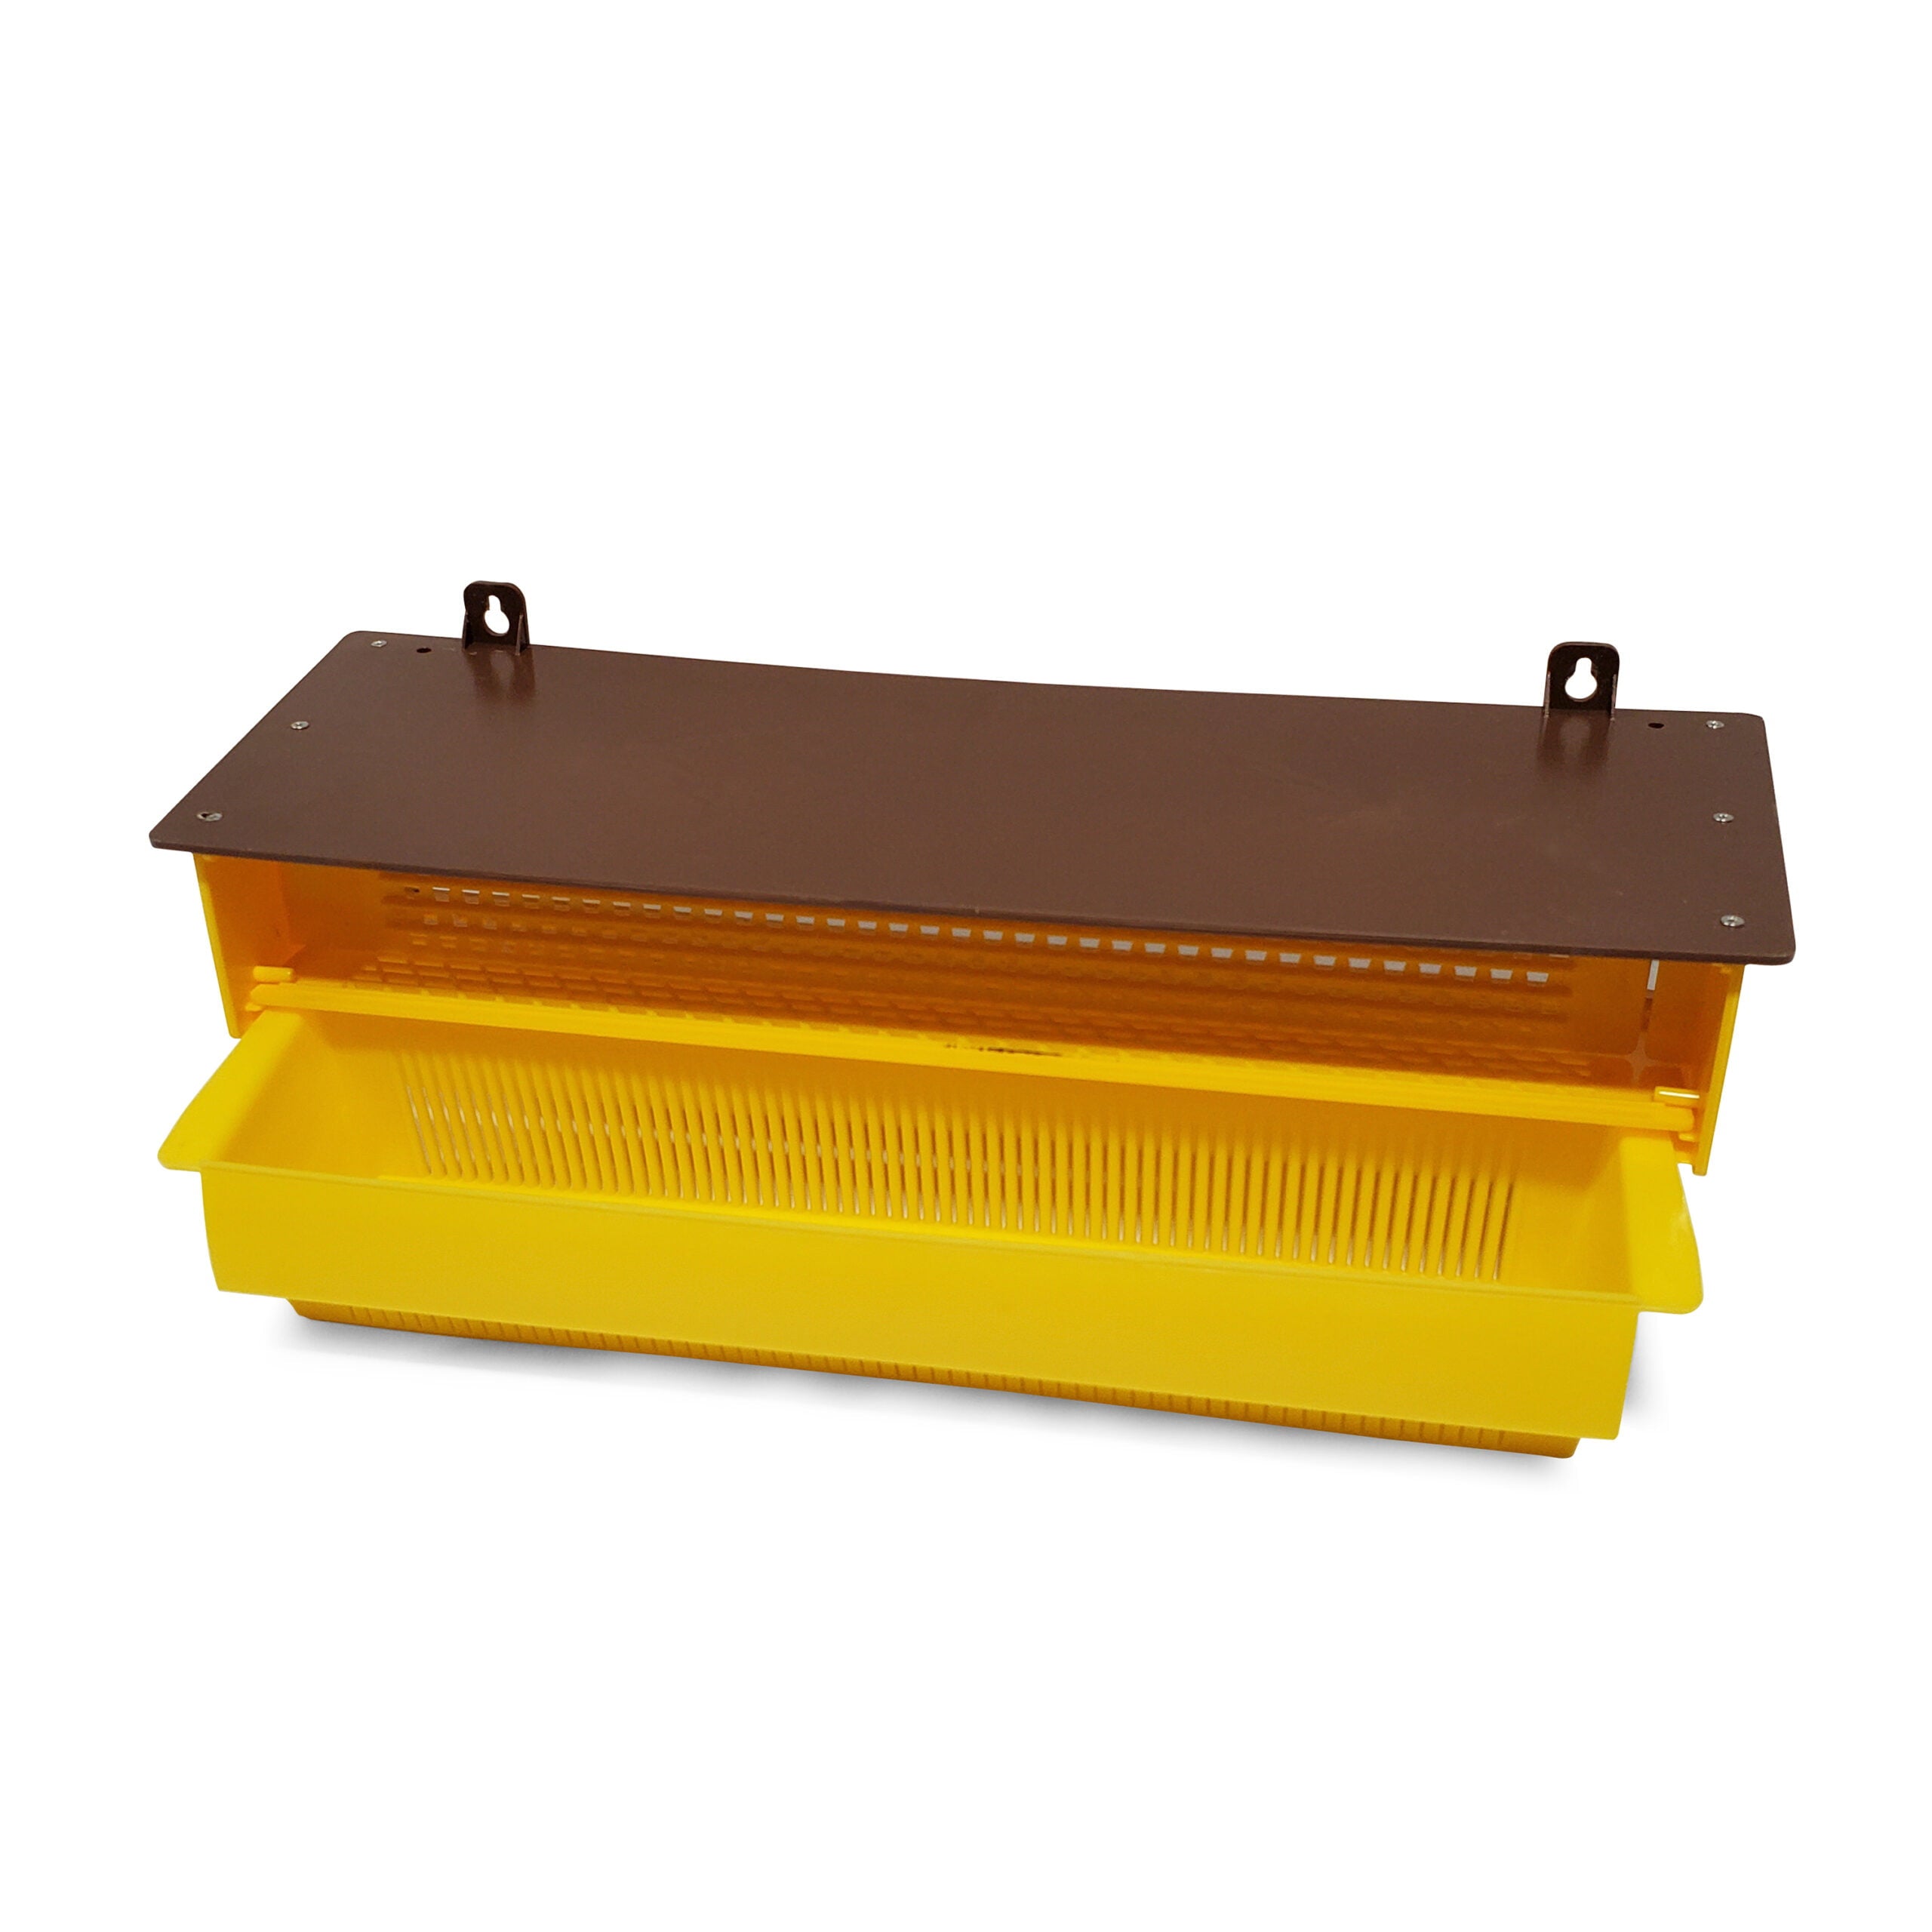 Bee hive Pollen Trap - 10 Frame for beekeeping